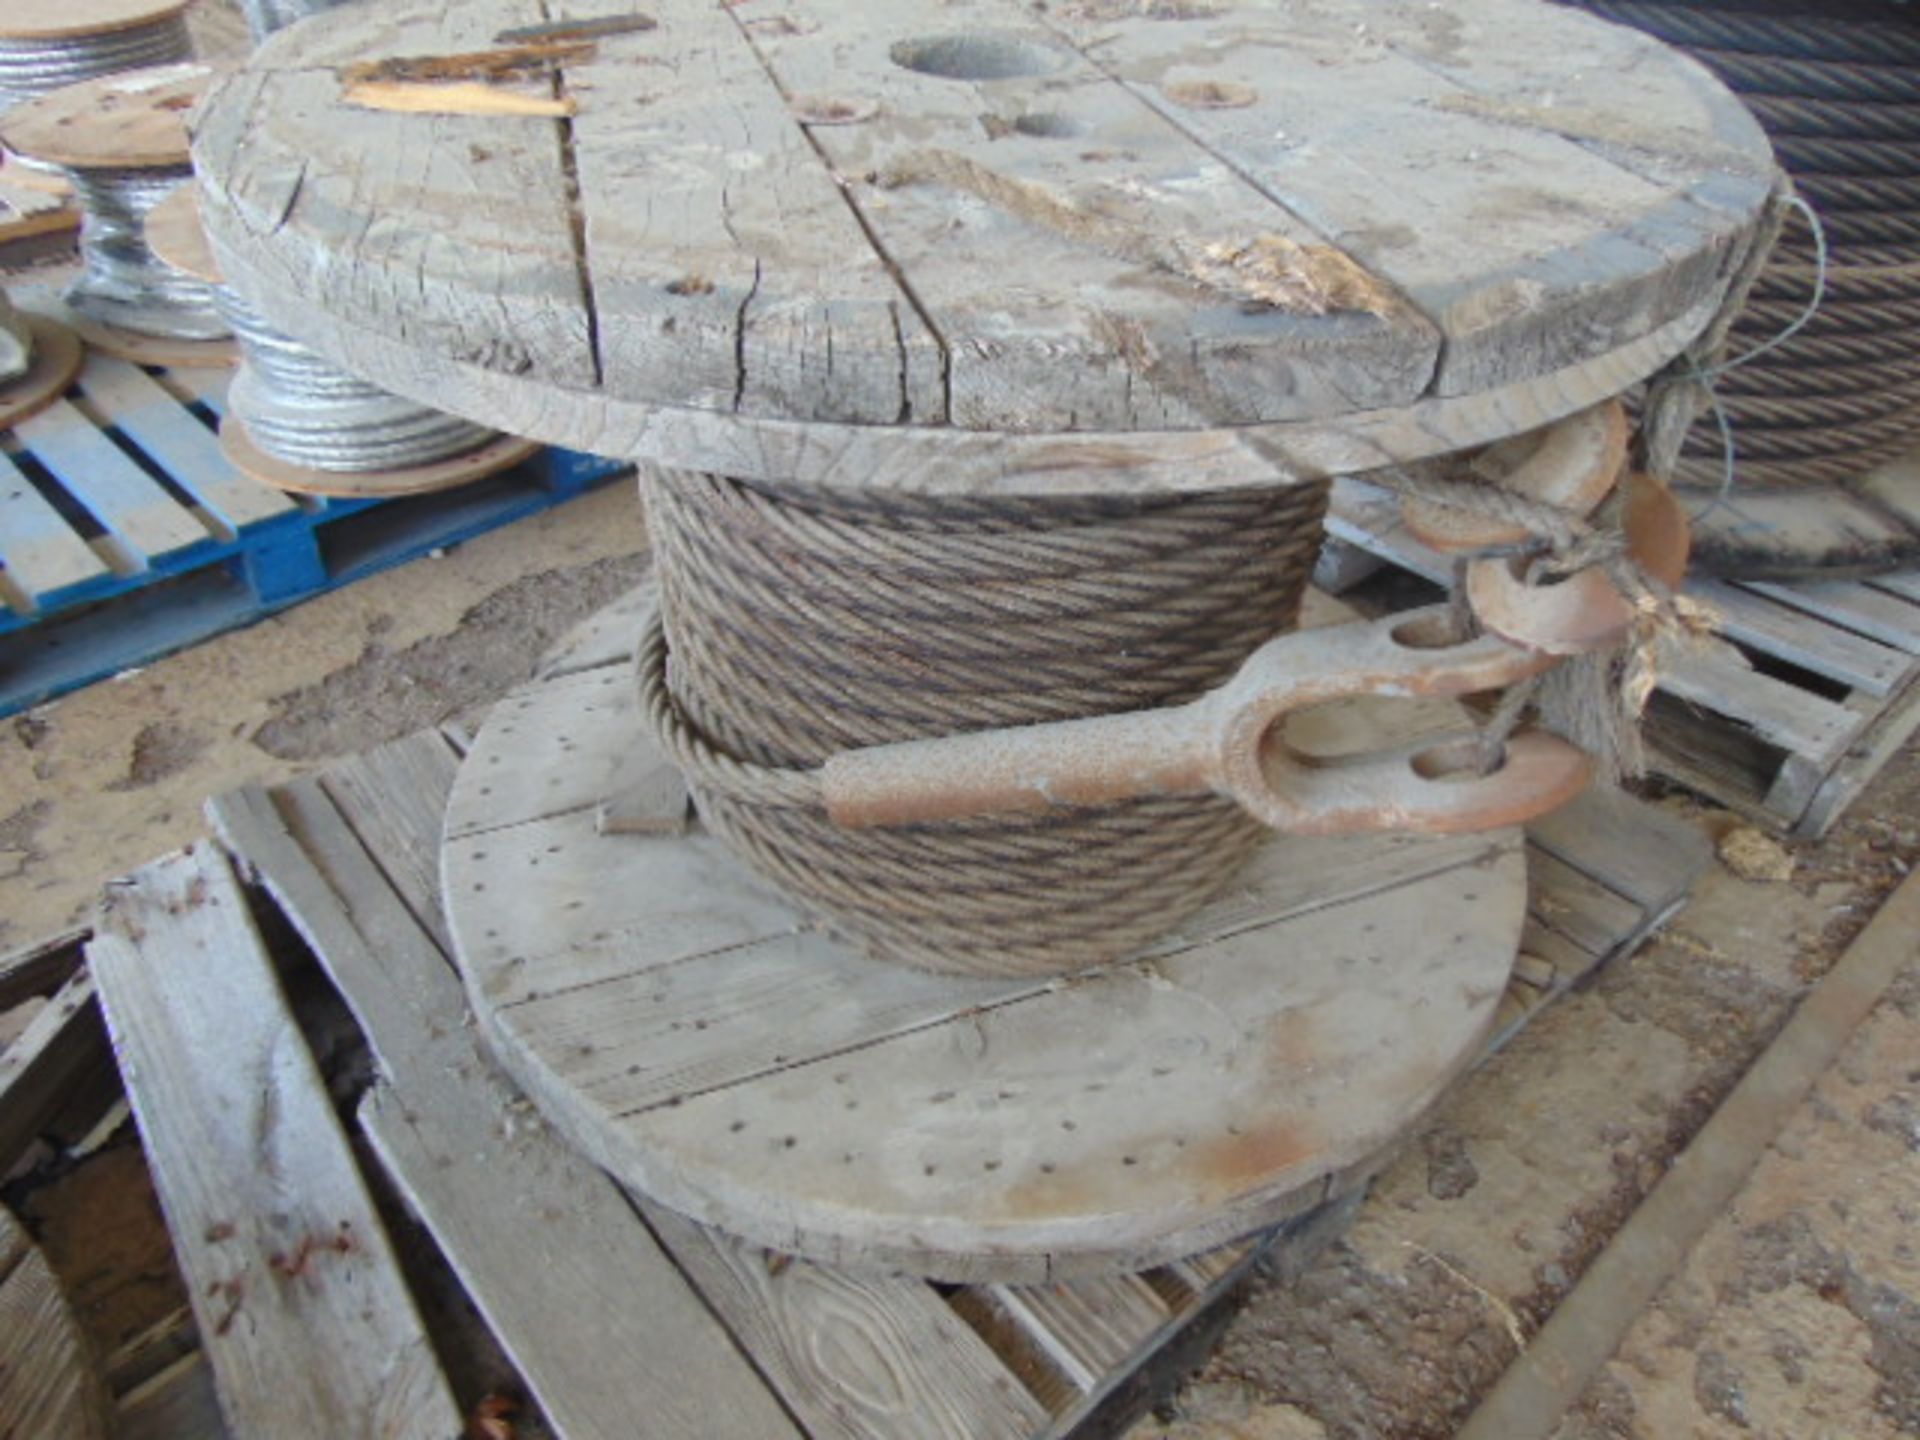 LOT OF BRAIDED STEEL CRANE CABLE (on four skids) - Image 4 of 5